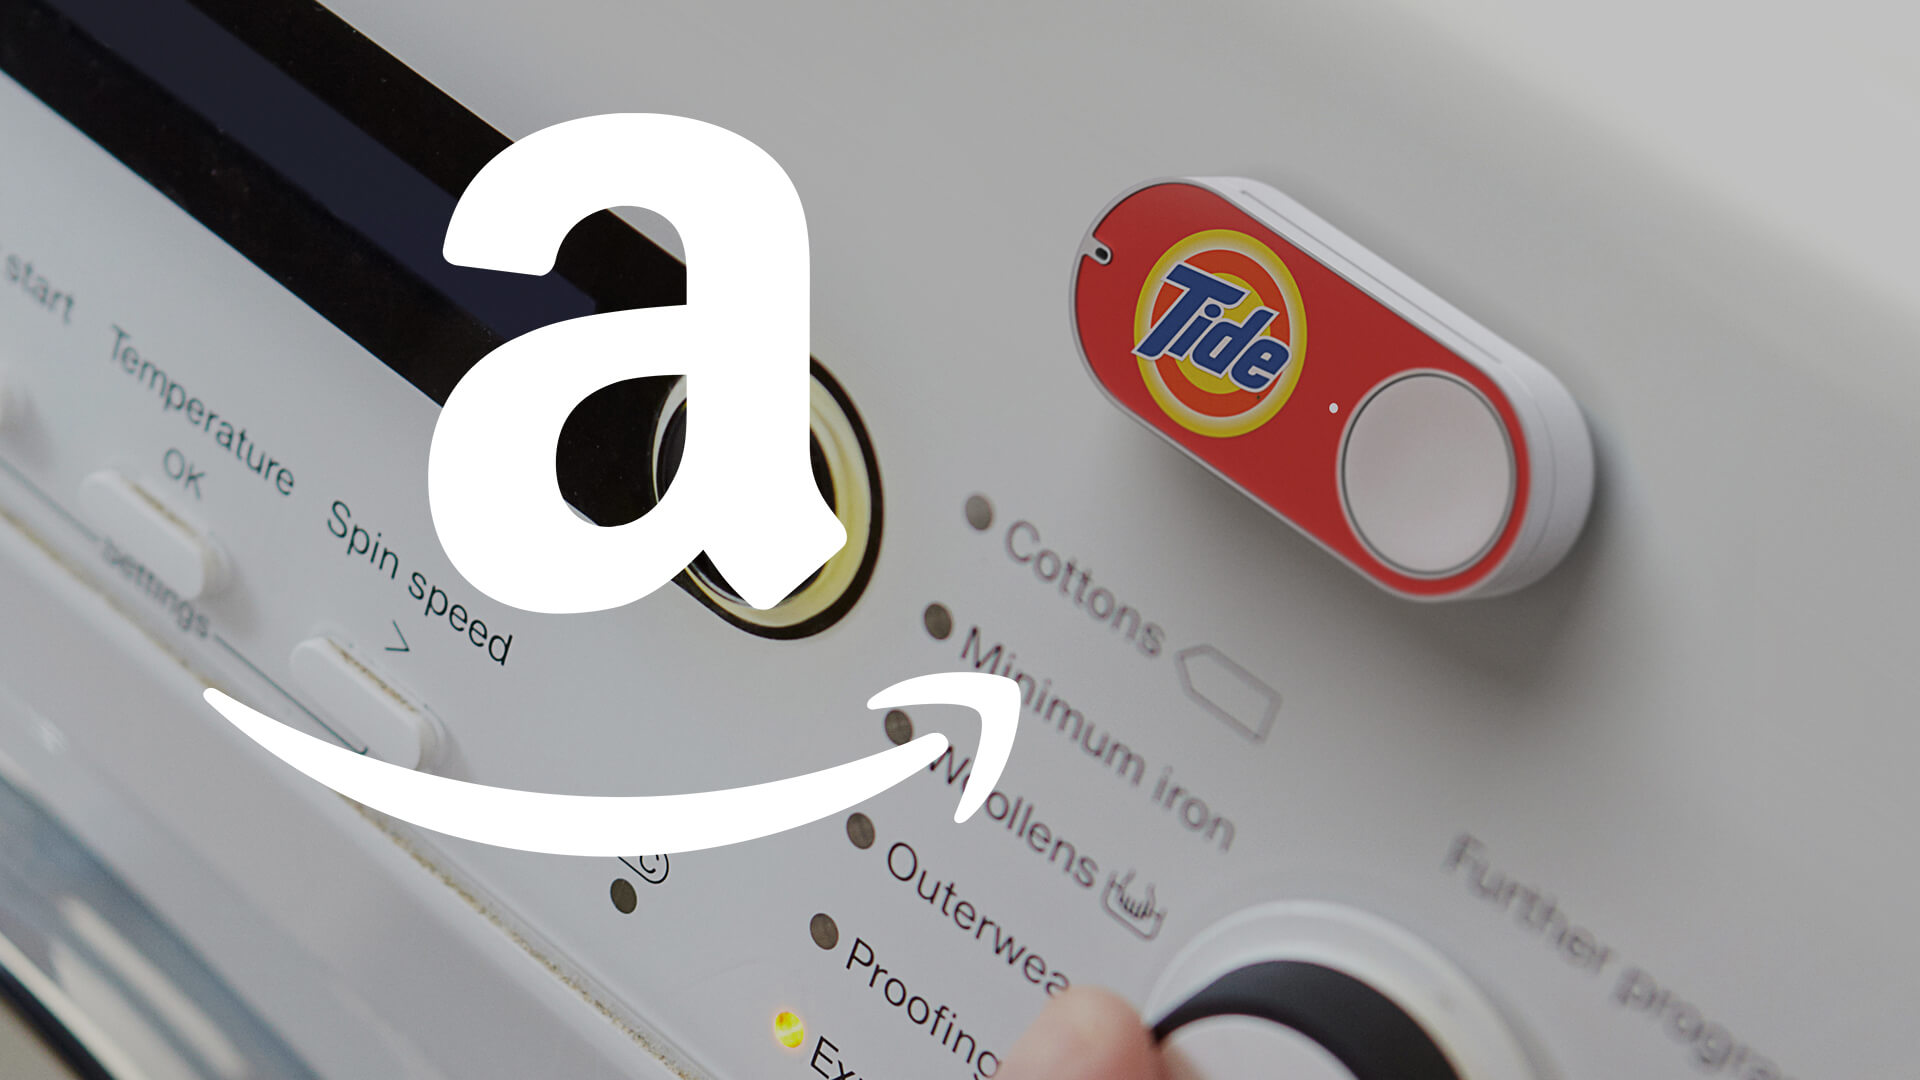 Amazon Prime Dash Buttons go virtual on apps, home page